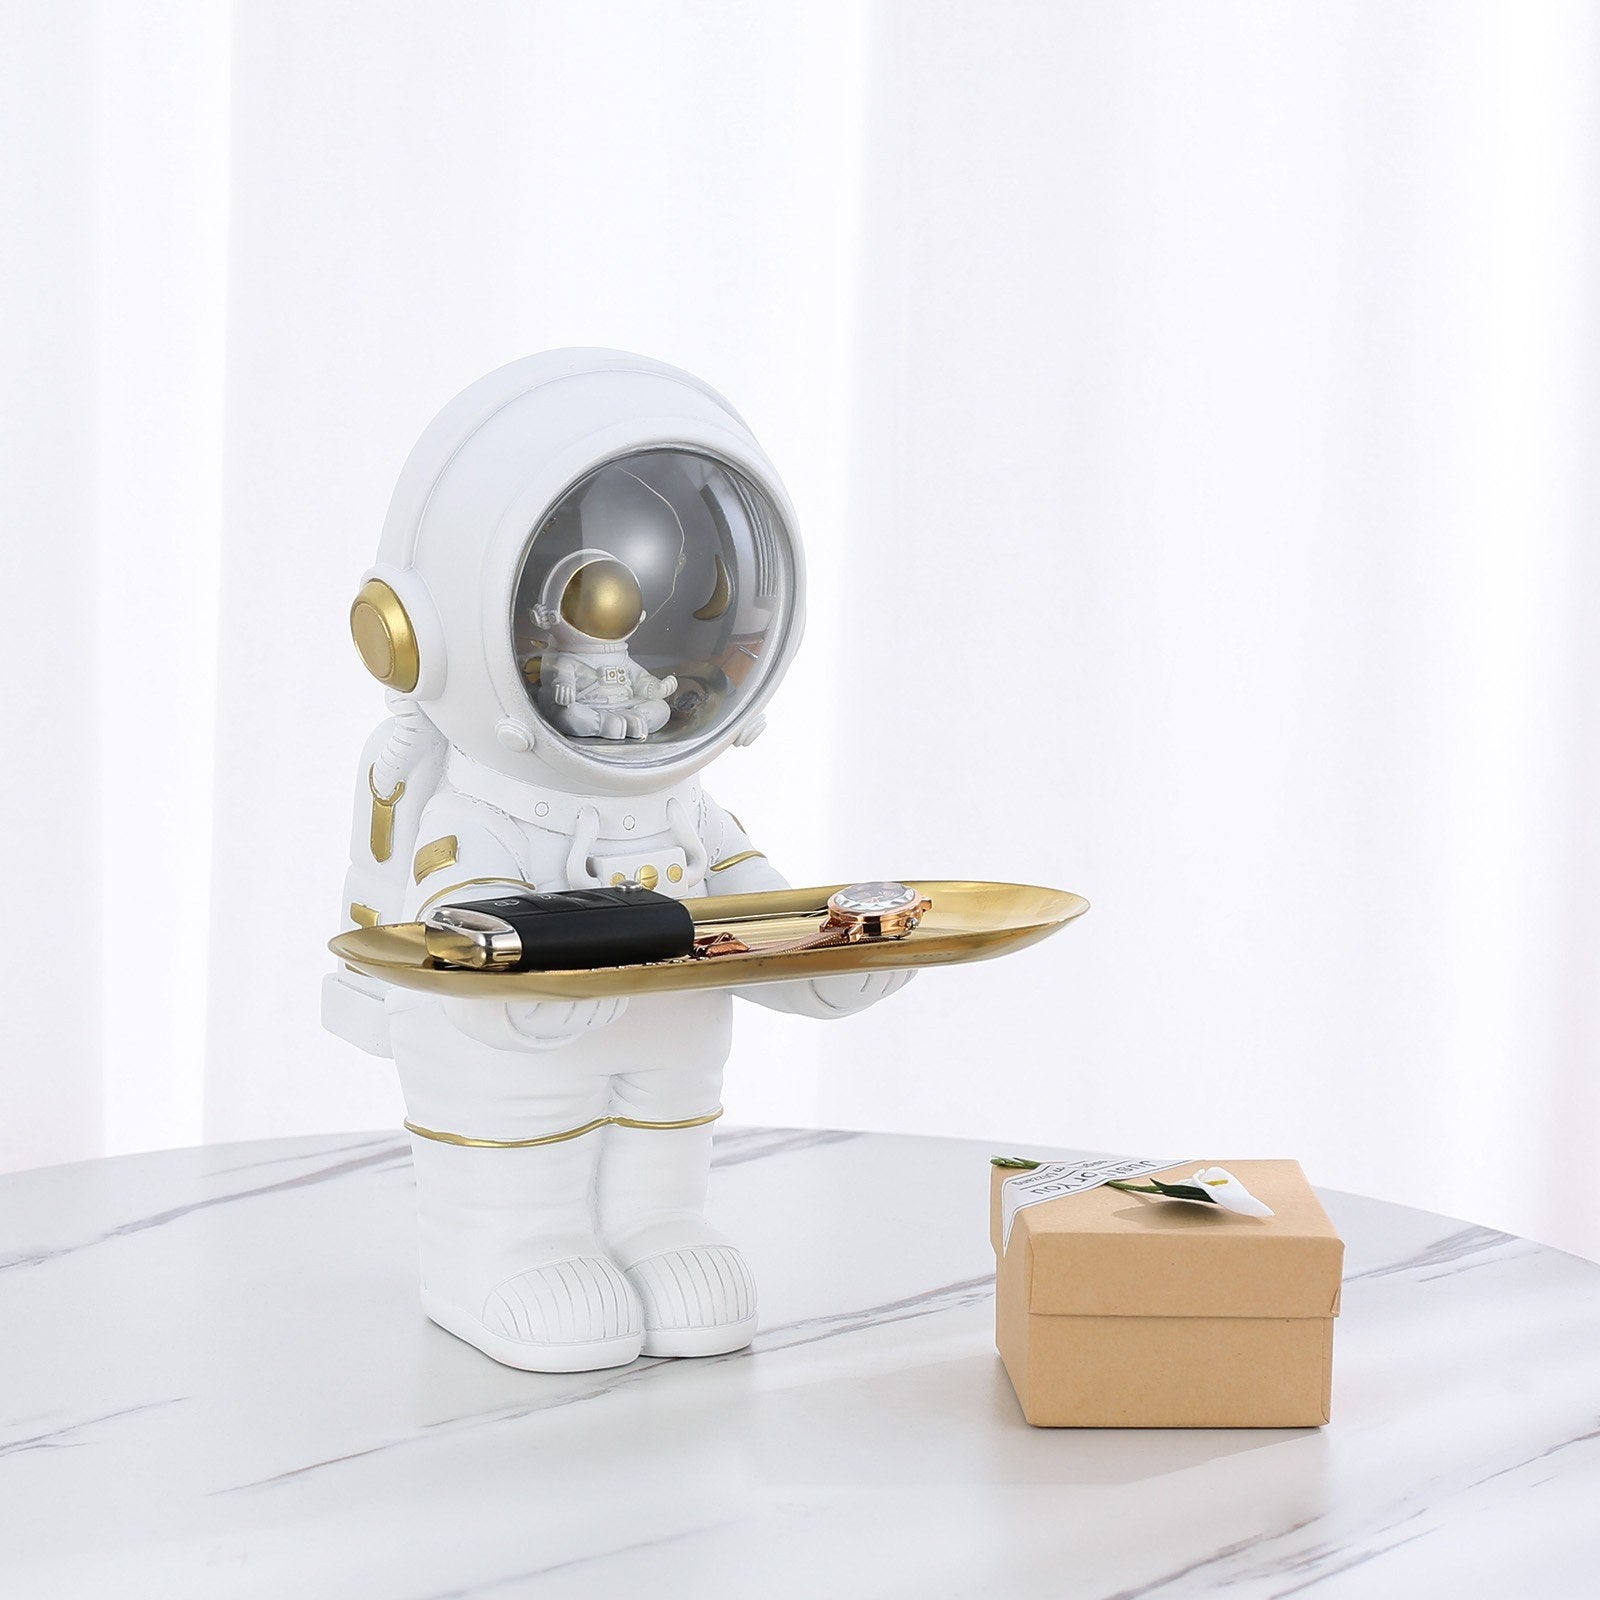 Astronaut figurine is a must-have for those who love the stars, cosmos